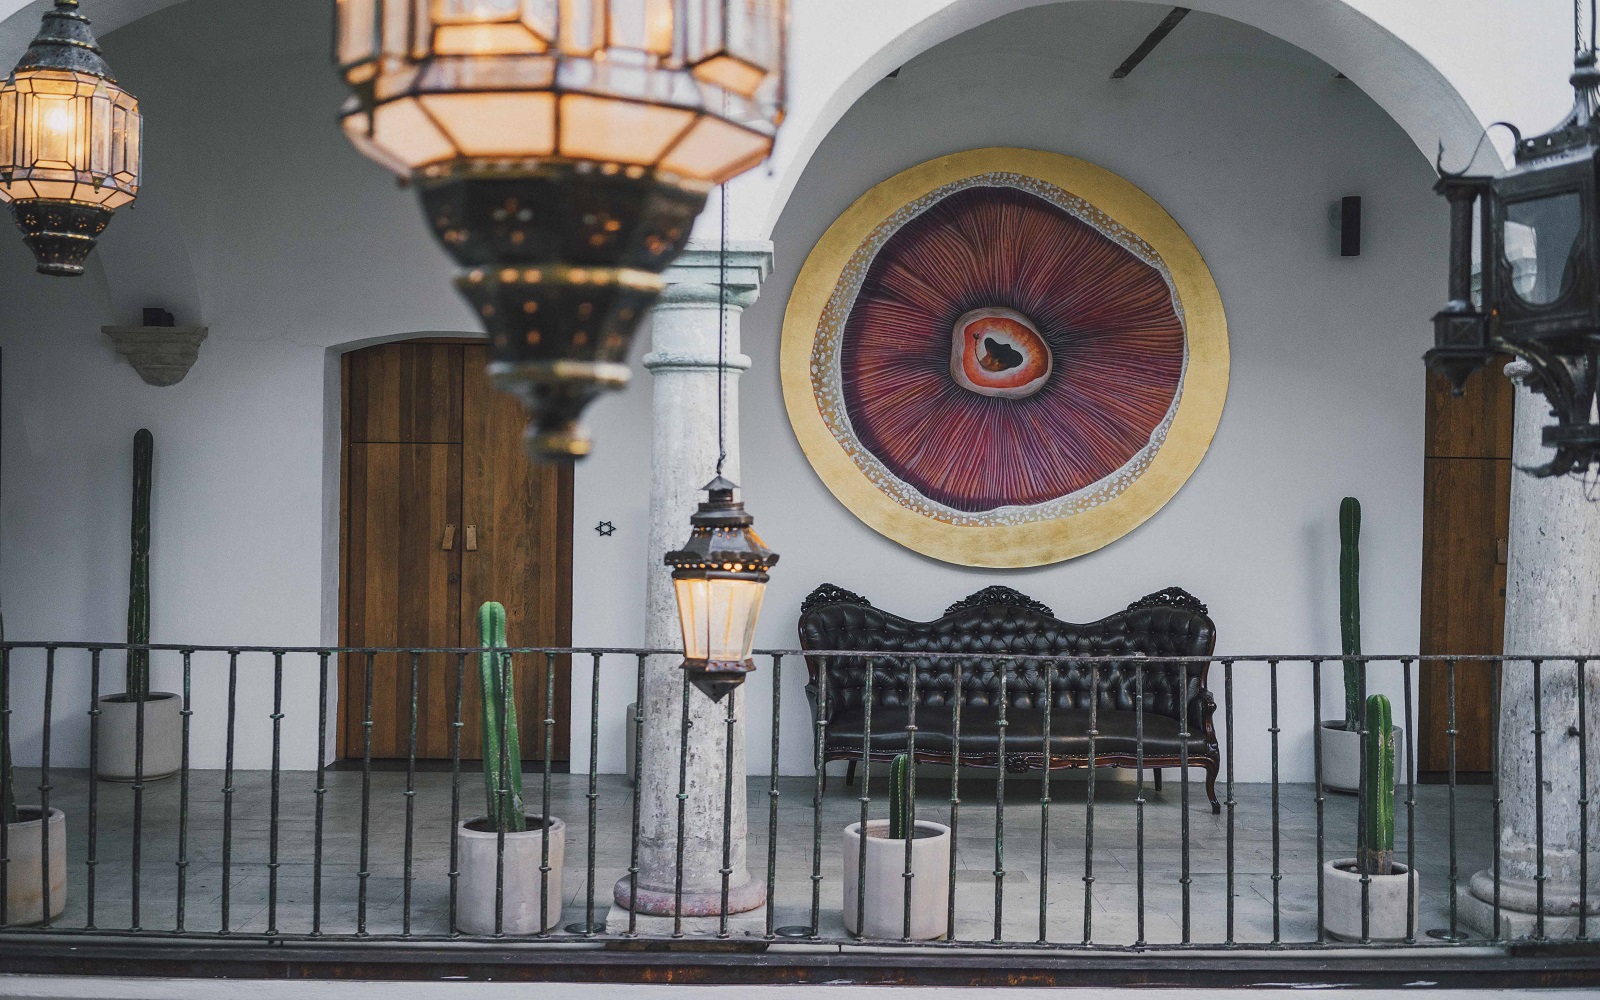 lanterns and architectural arches frame contemporary art at Hotel Sin Nombre